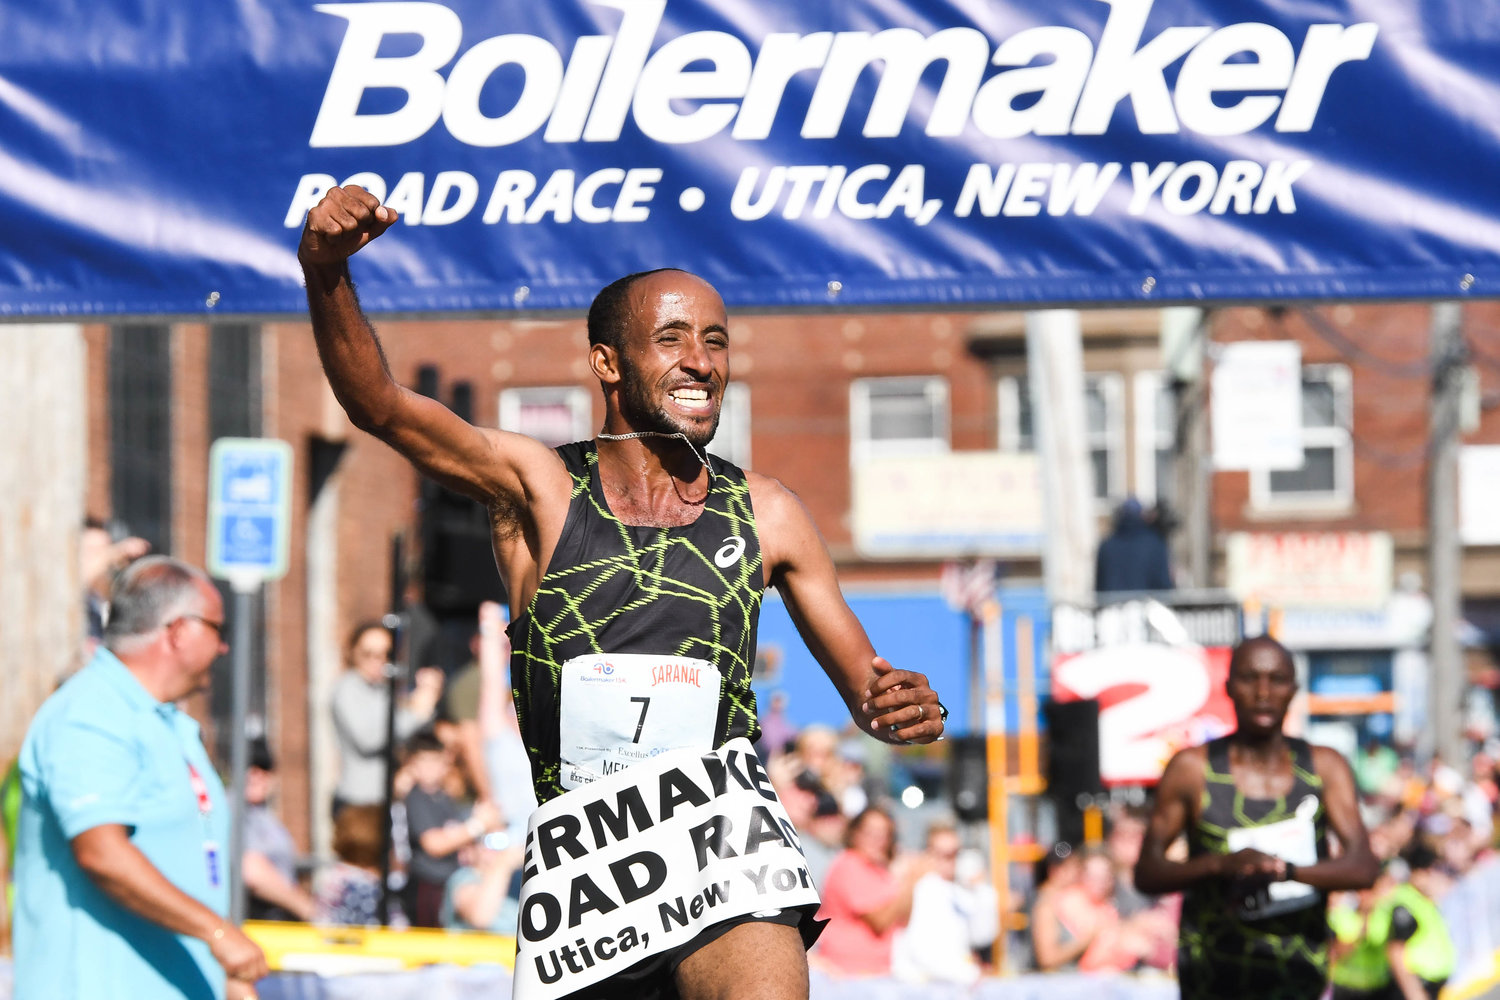 Jemal Yimer Mekonnen celebrates after finishing 1st in the 15K during the 45th Boilermaker Road Race on Sunday, July 10 in Utica.